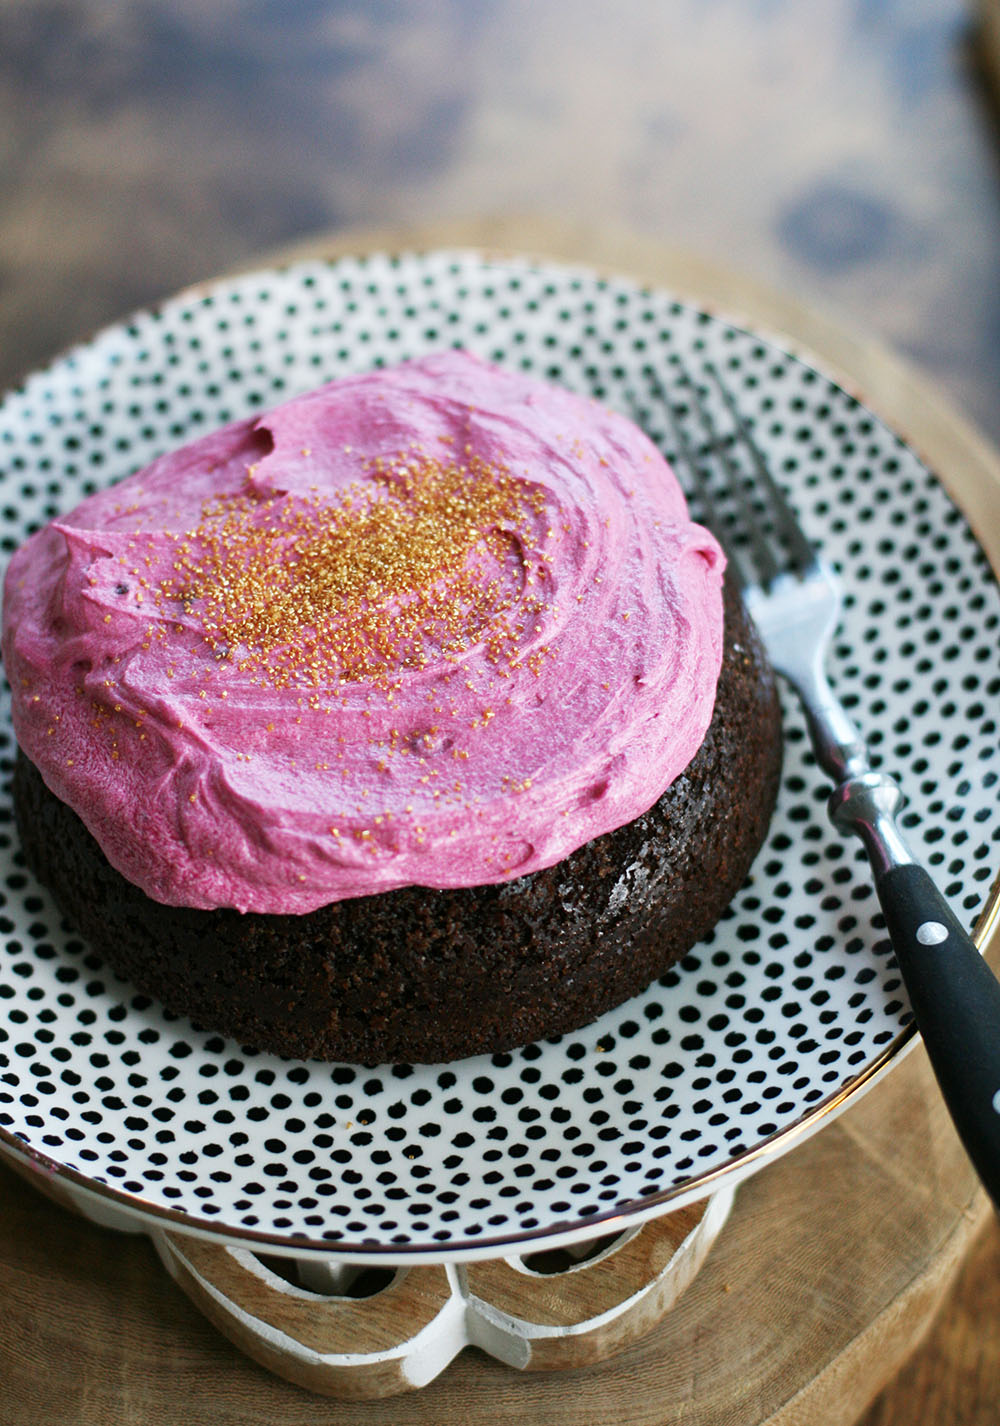 Make a cake in a bowl! Give it away as a gift. An oven-safe bowl makes the perfect baking vessel. 